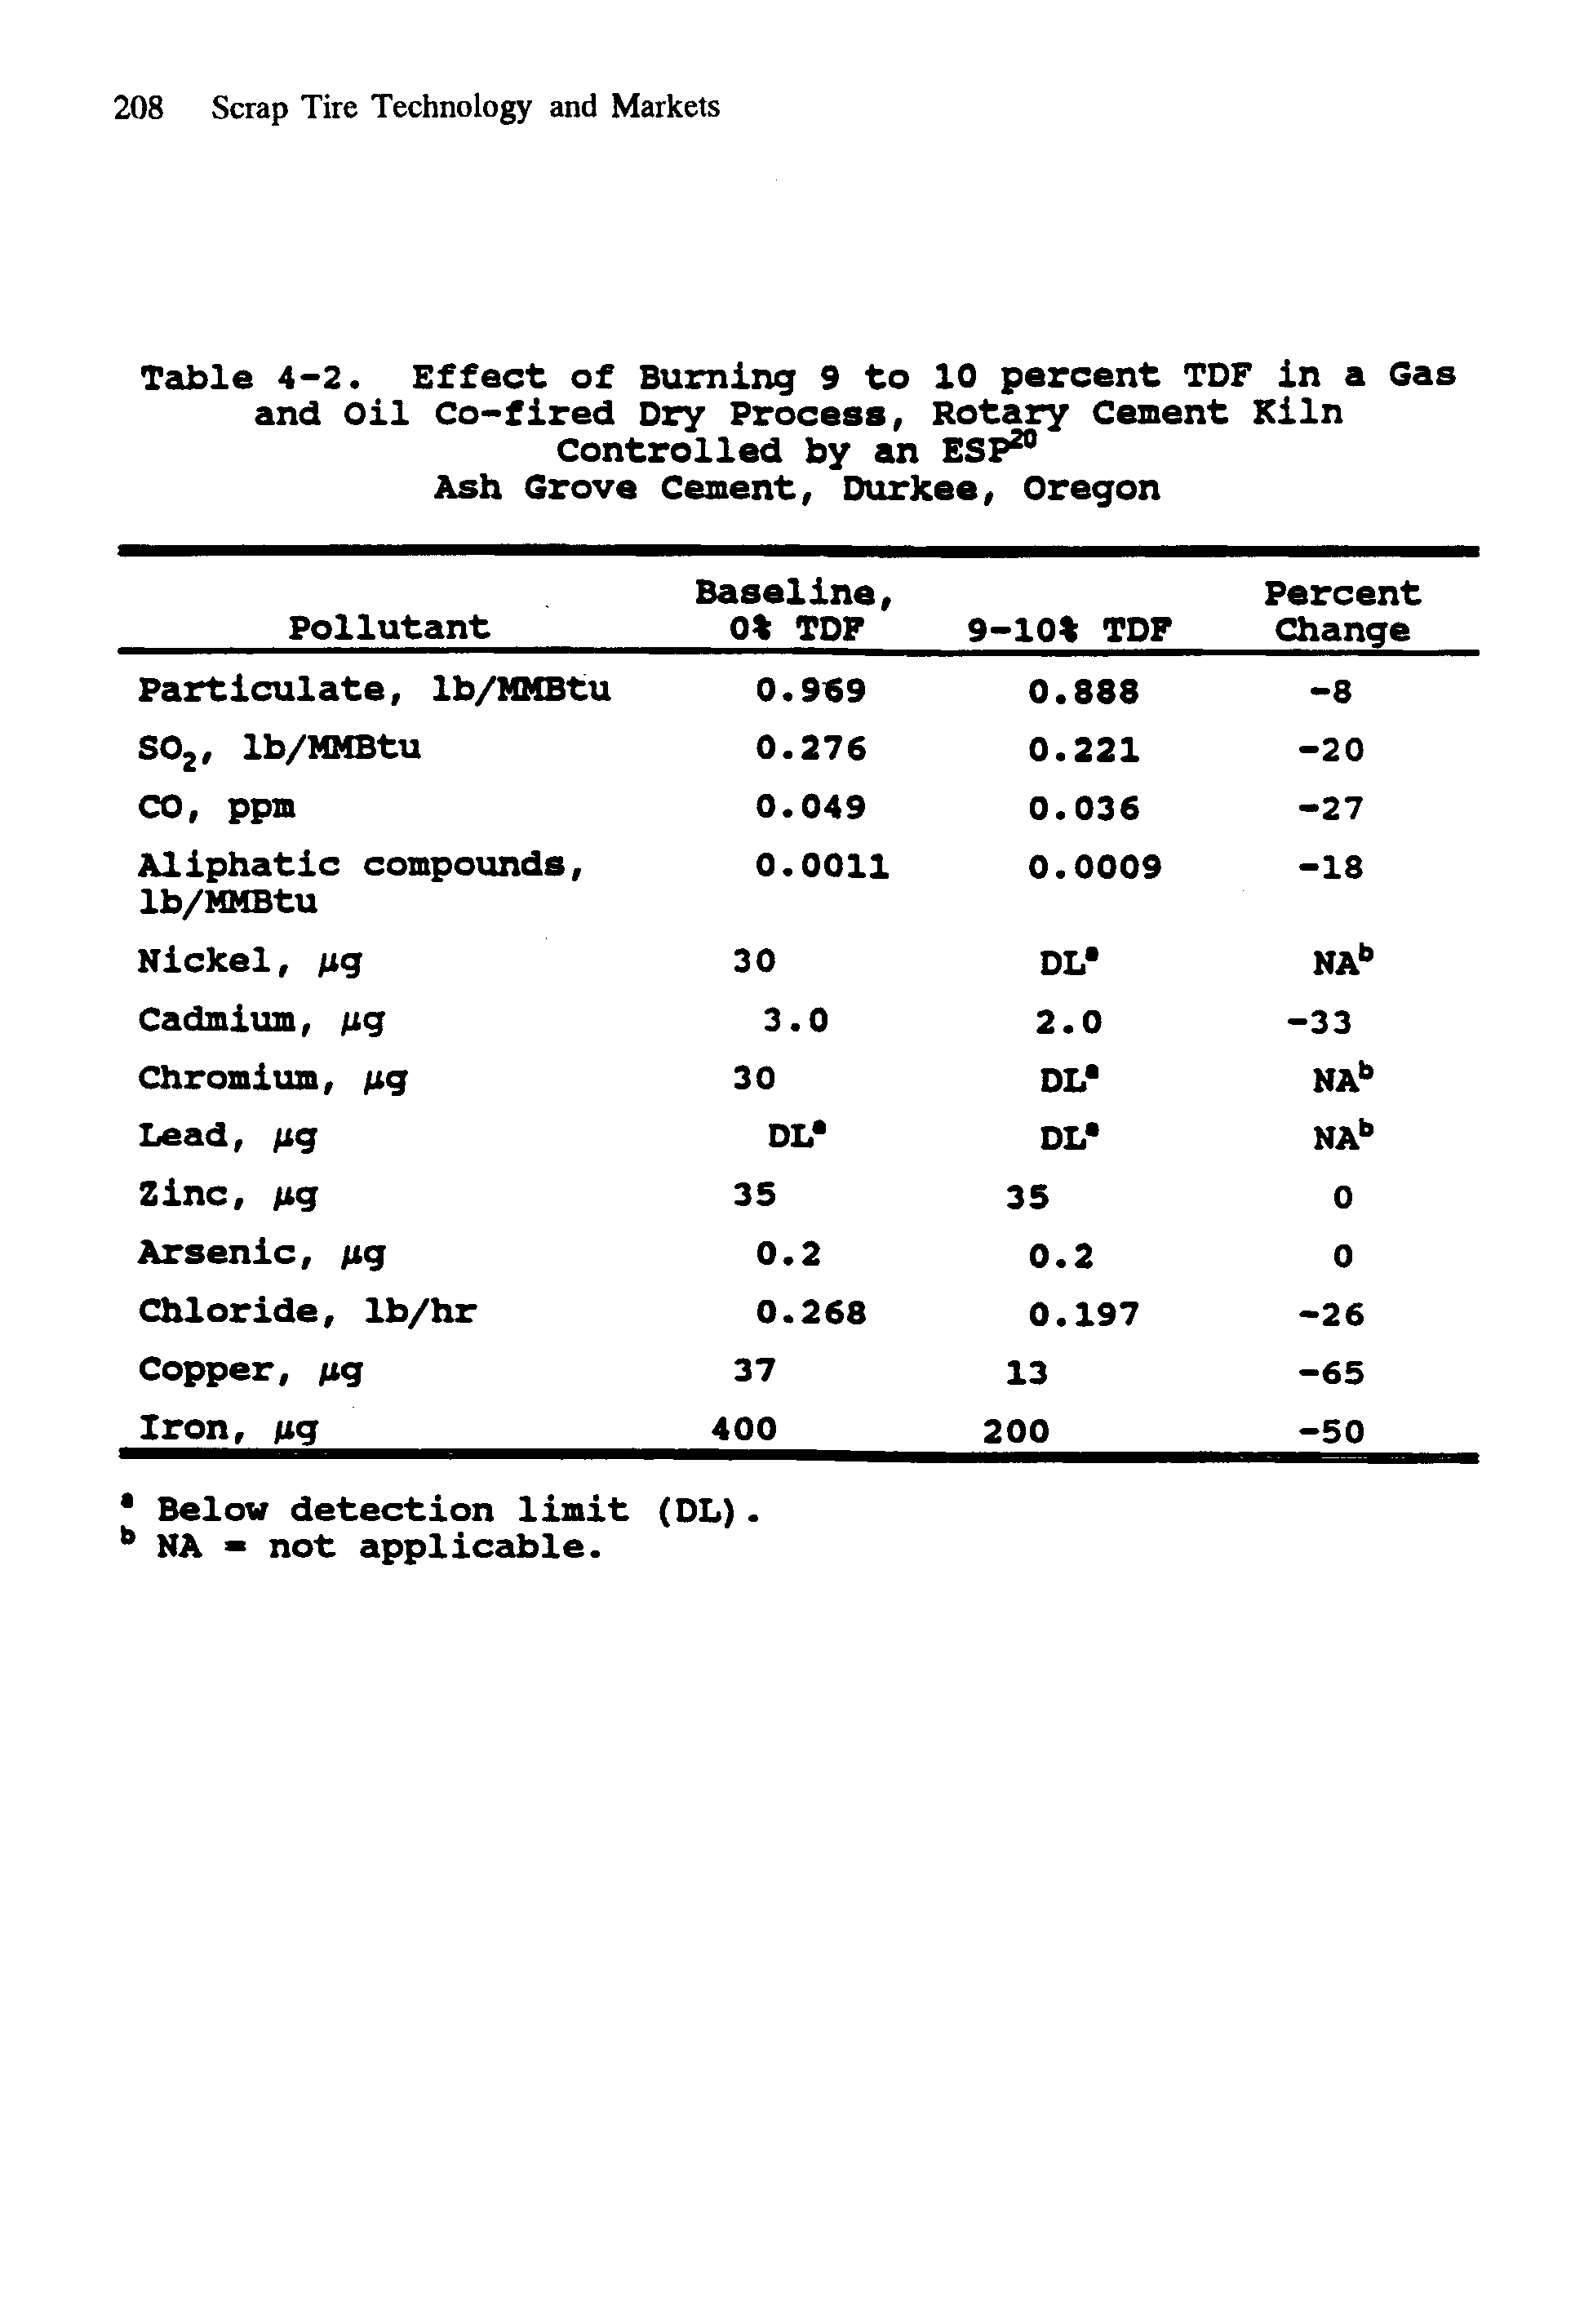 Table 4-2. Effect of Burning 9 to 10 percent TDF In a Gas and Oil Co-fired Dry Process, Rotary Cement Kiln Controlled by an ESP20 Ash Grove Cement, Durkee, Oregon...